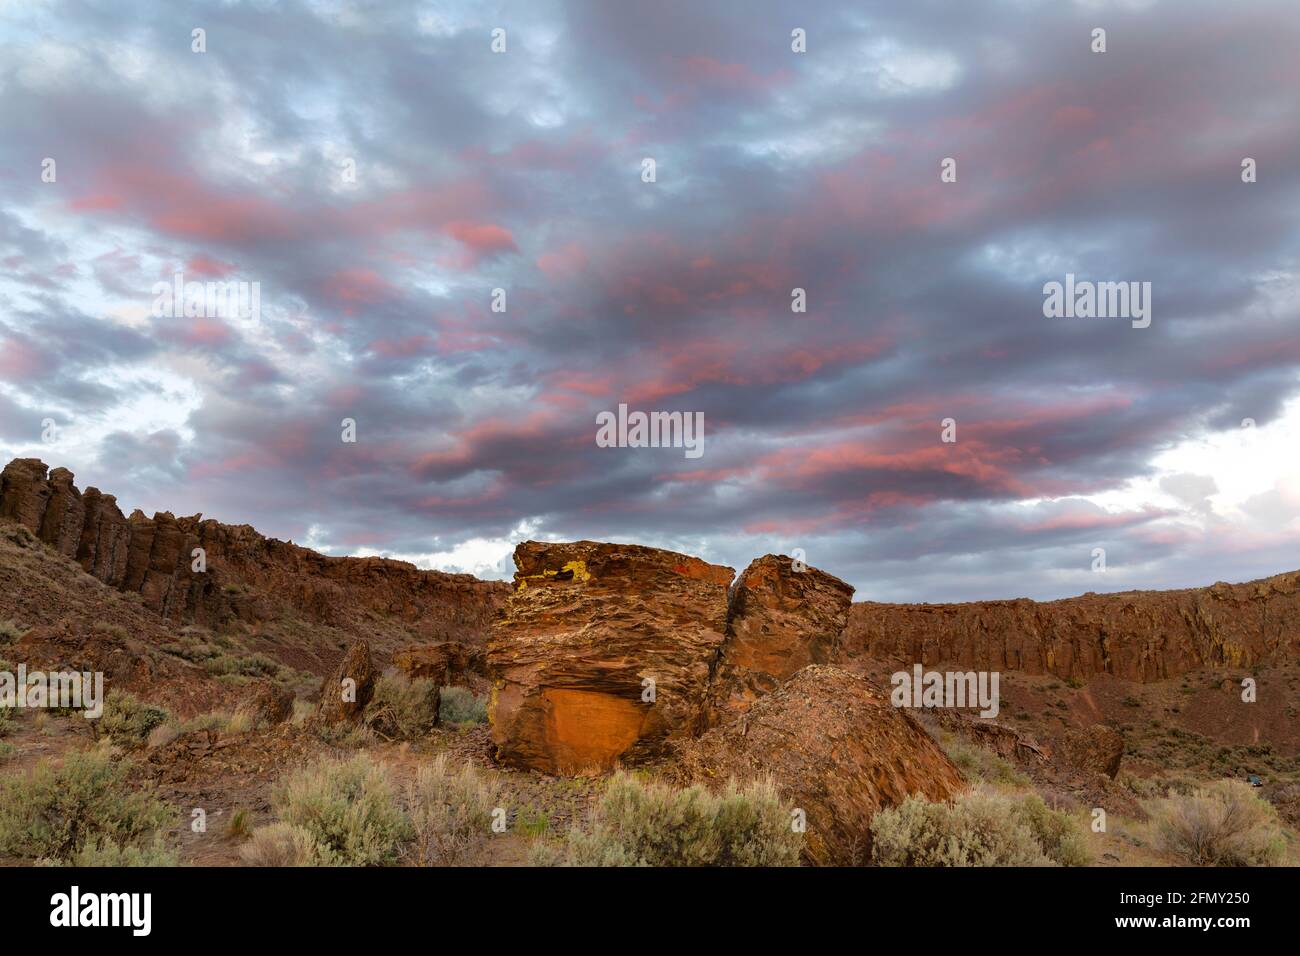 WA20222-00......WASHINGTON - Rock formations in Frenchman Coulee near Vantage. Stock Photo